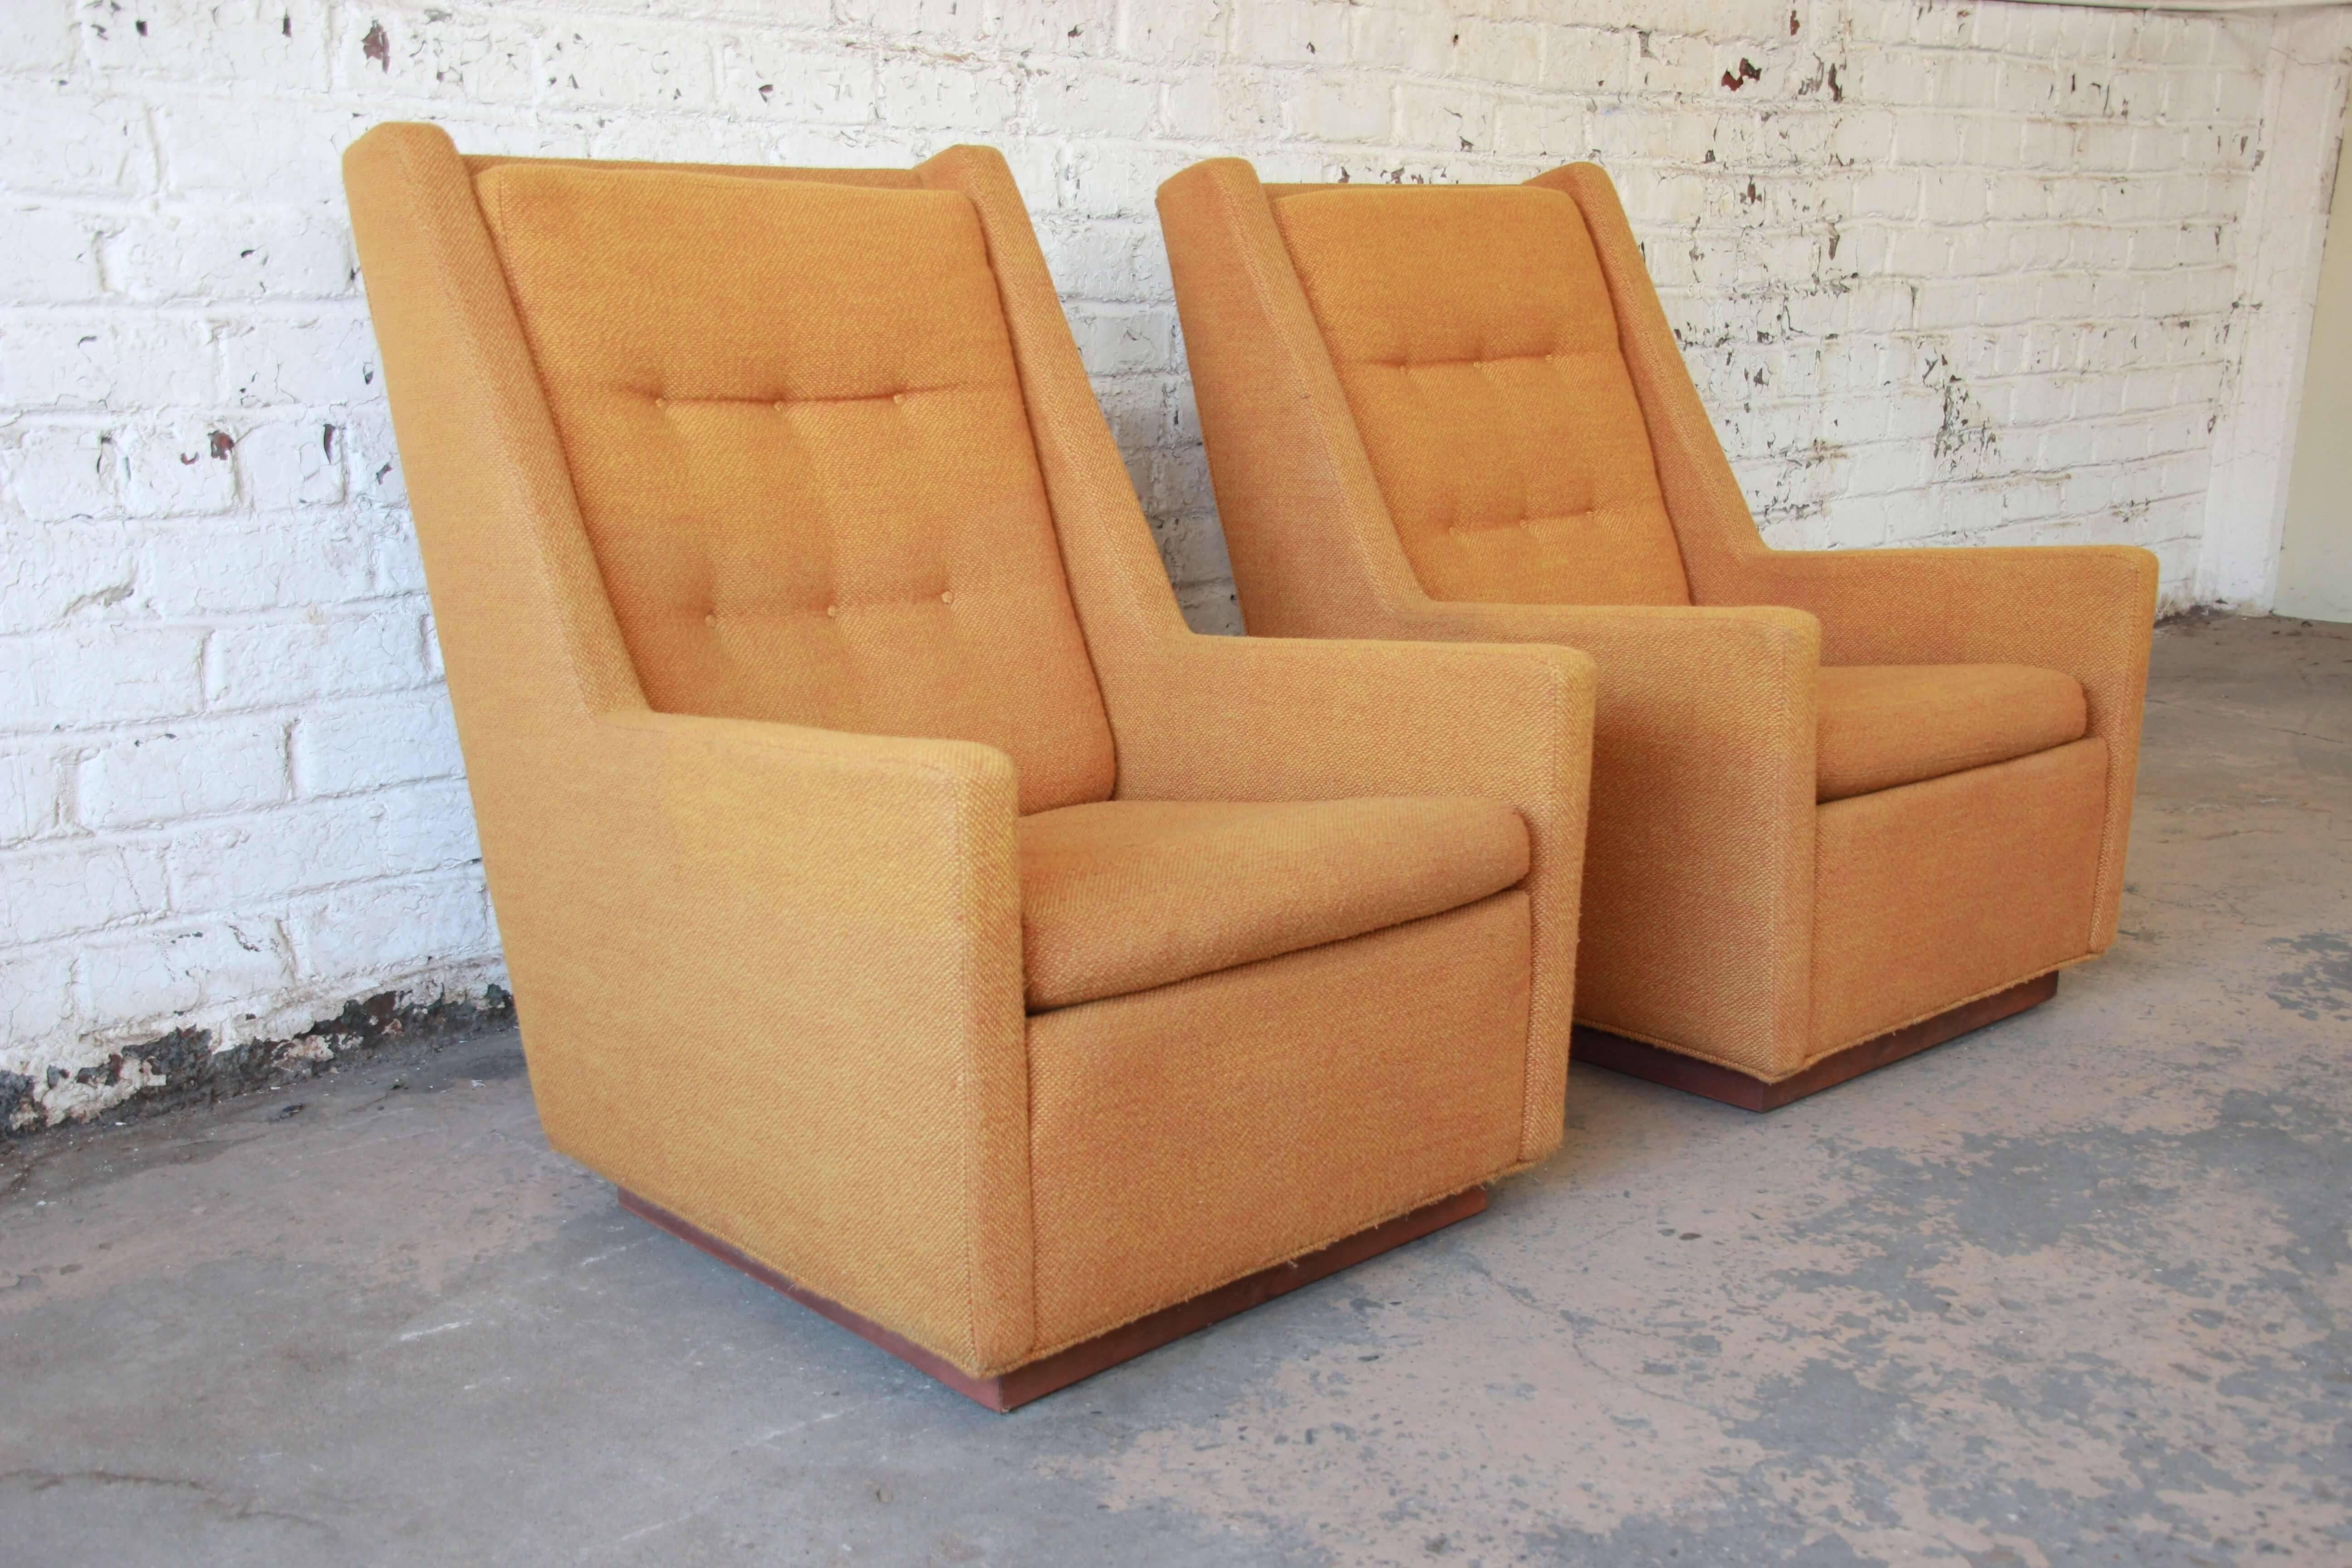 Mid-Century Modern Pair of Lounge Chairs and Ottoman by Milo Baughman for James, Inc